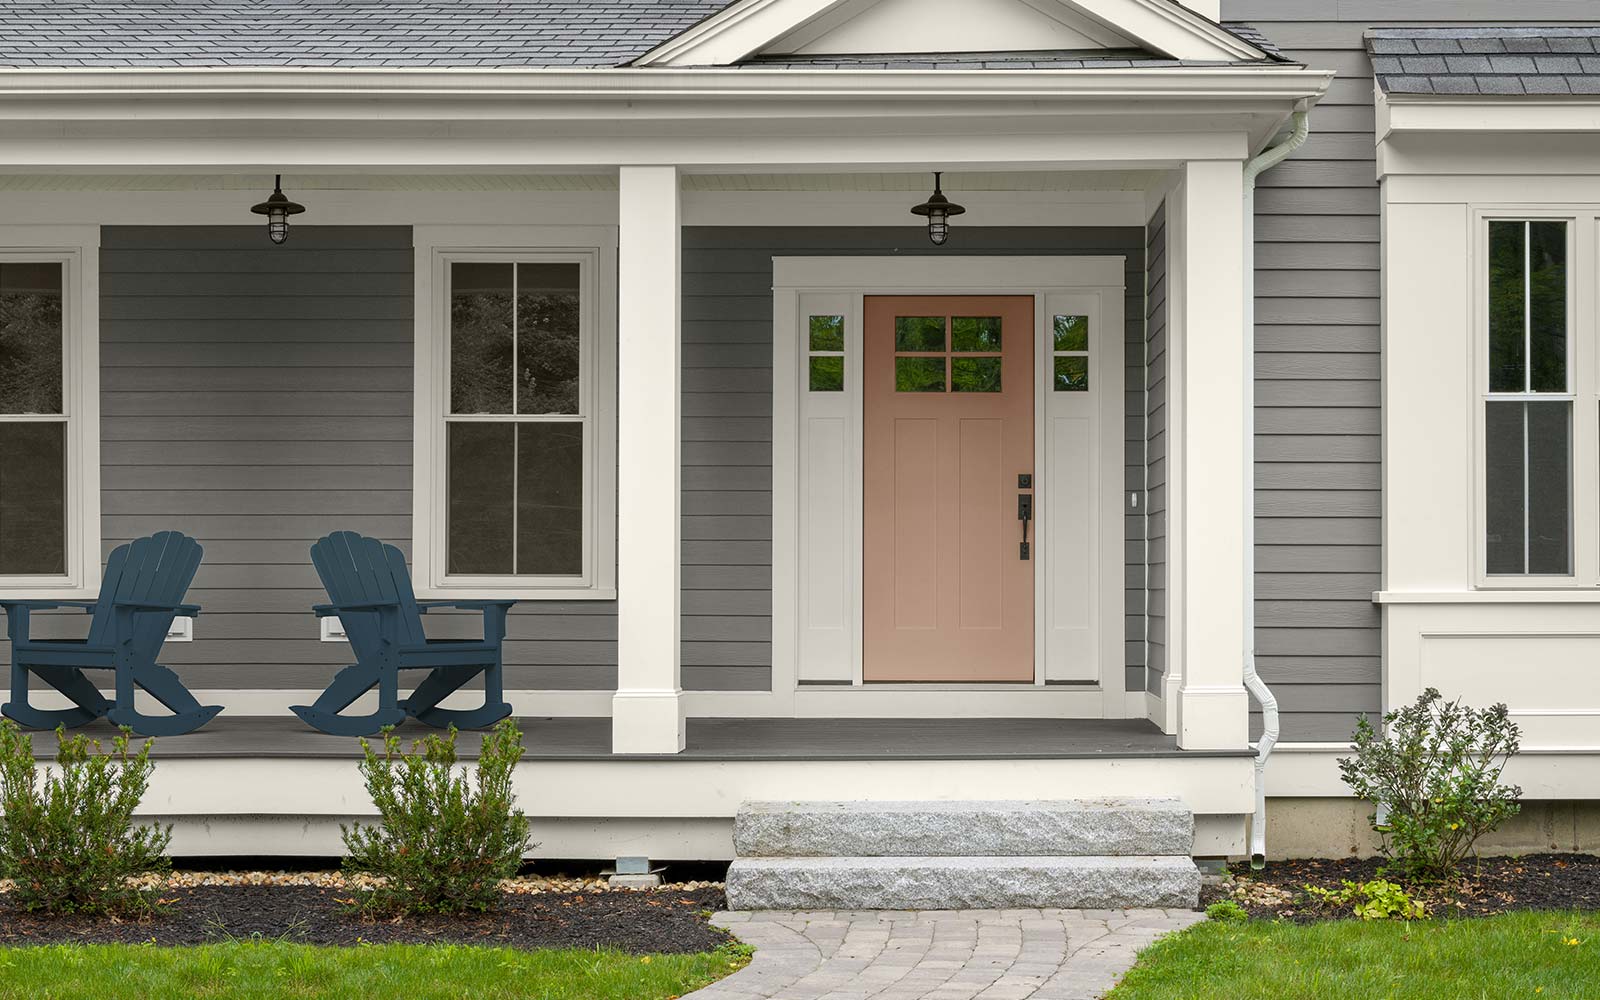 An exterior image with four color swatches sitting beside it. The image displays the four colors: a medium gray hue for the exterior body, a dark blue hue for the chair sitting on the porch, a dusty orange hue is used on the door, and a creamy white hue is used for the exteriors trim.